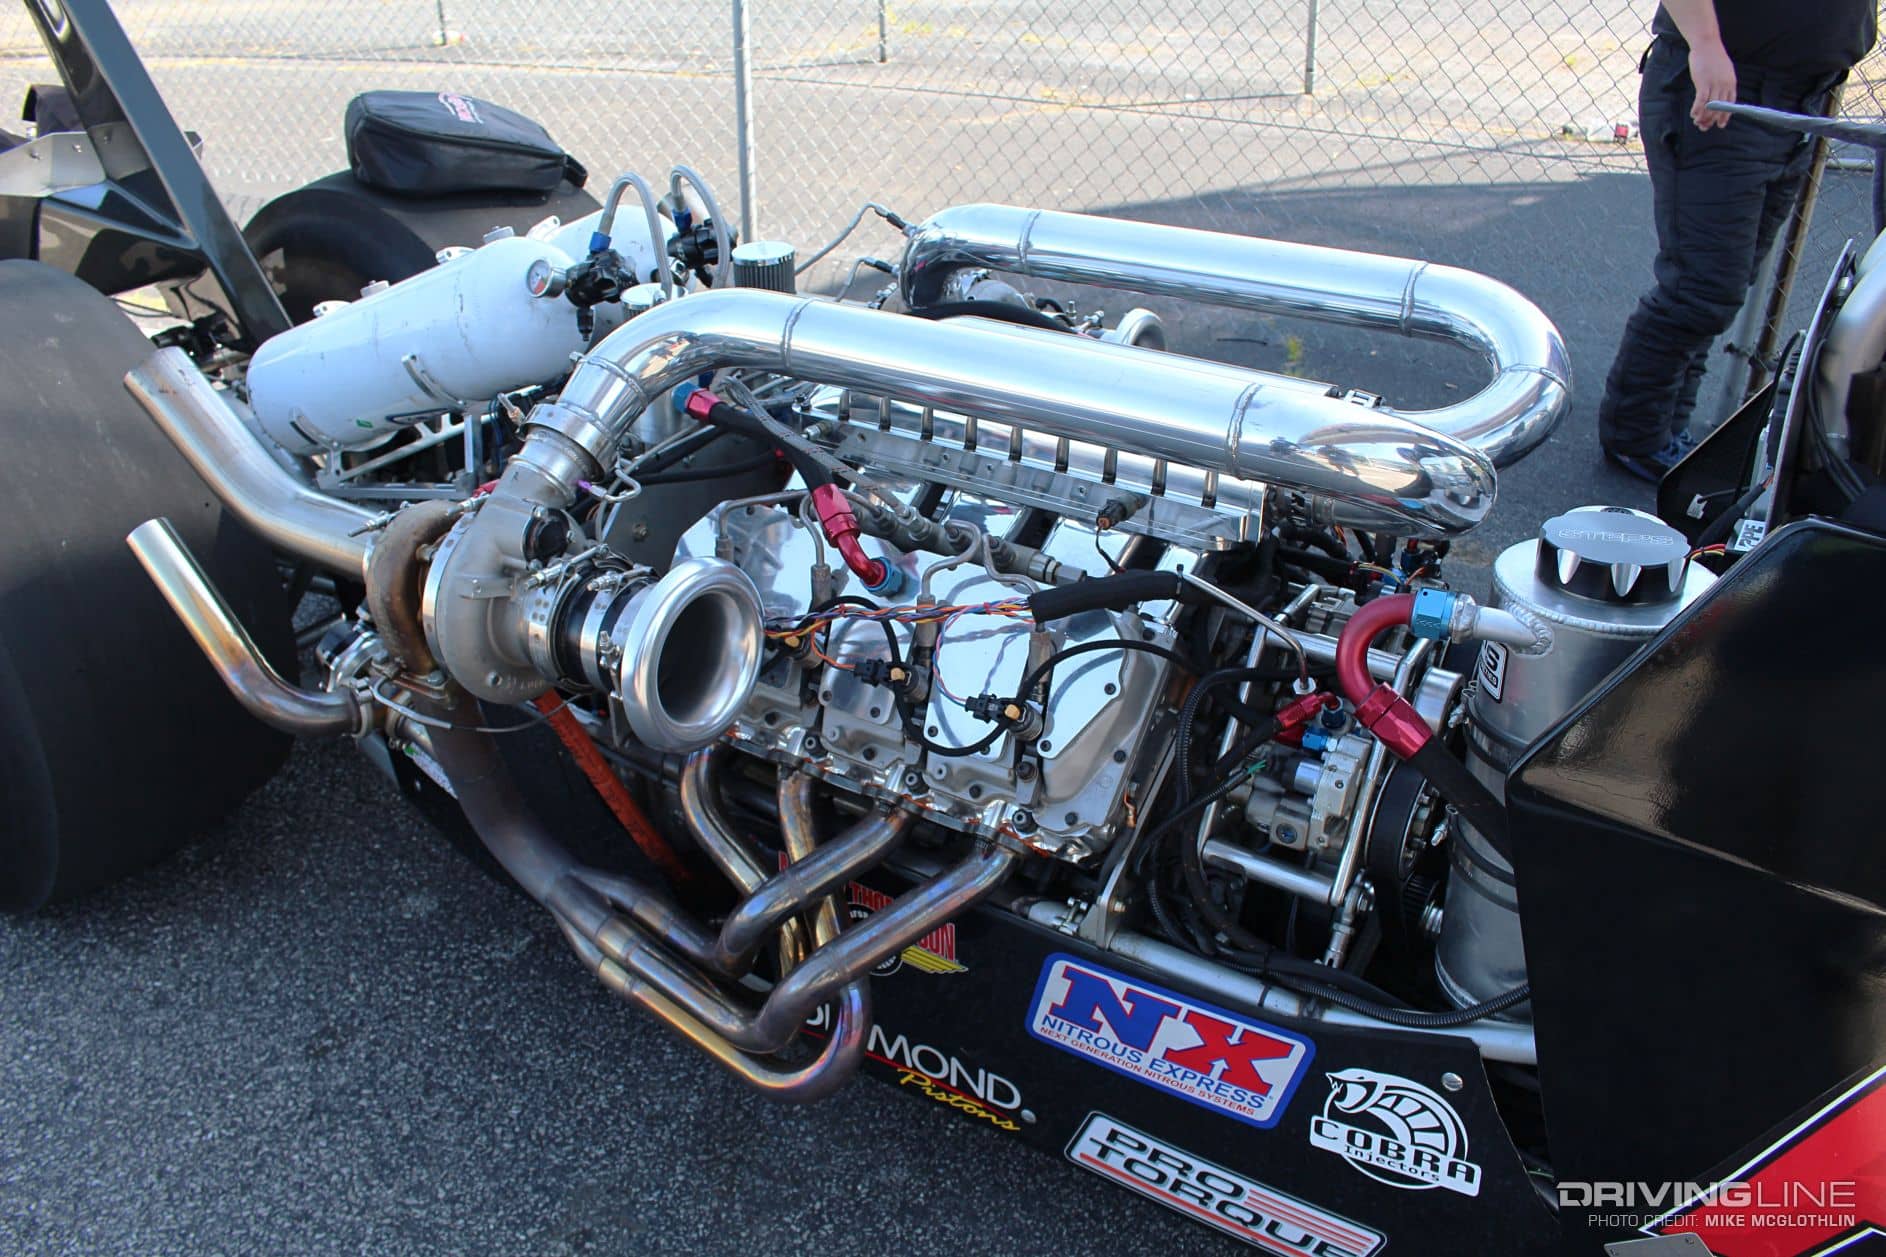  Duramax diesel engine with twin turbos and nitrous 